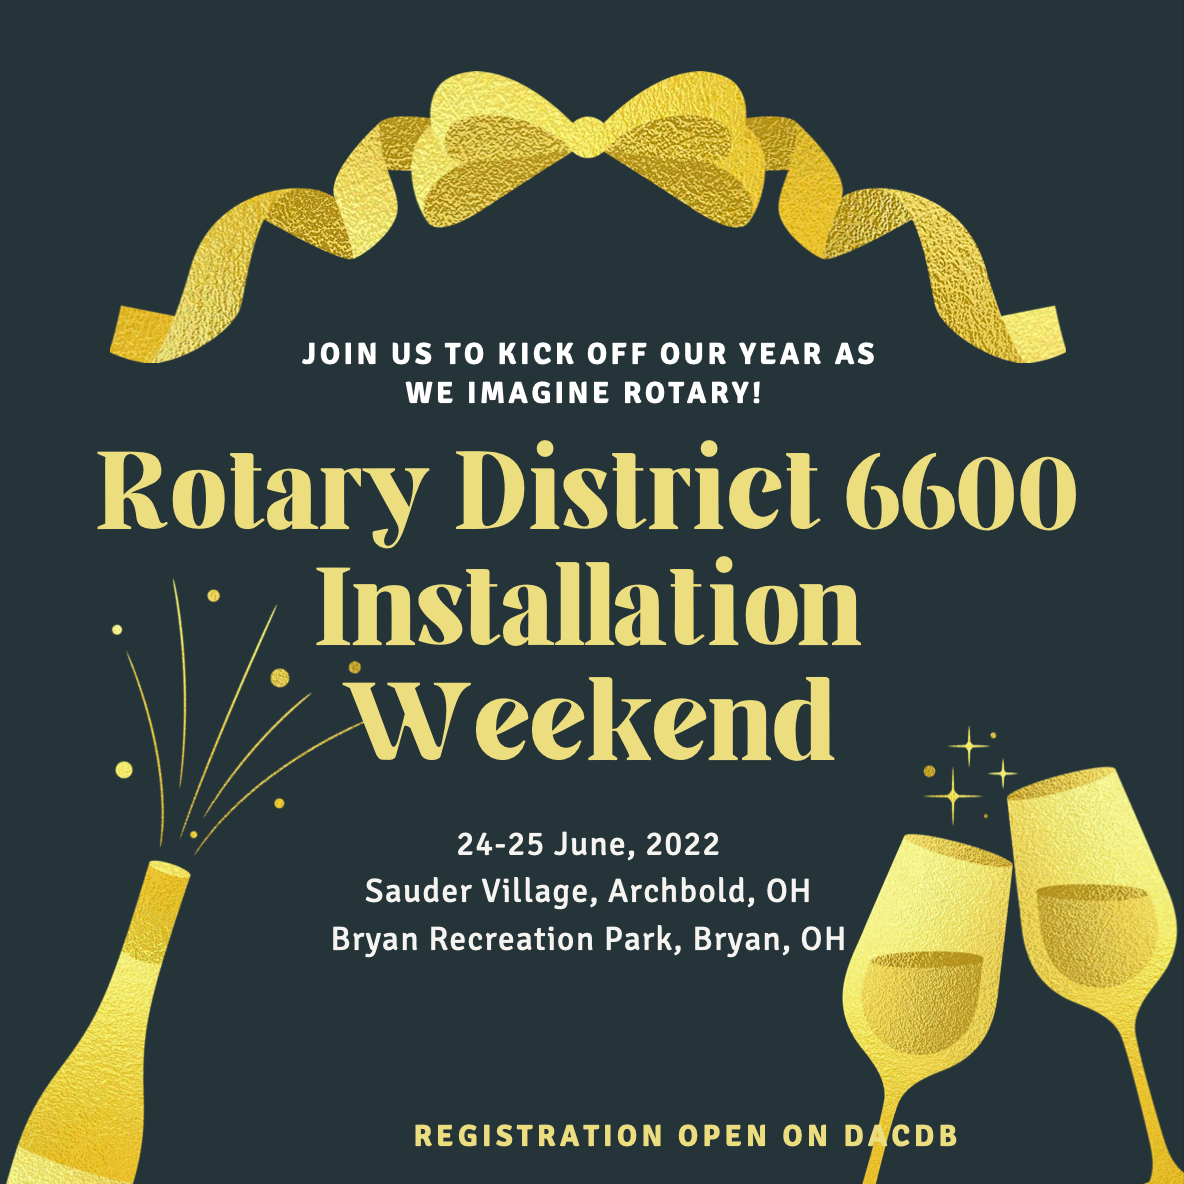 Rotary District 6600 Installation Weekend